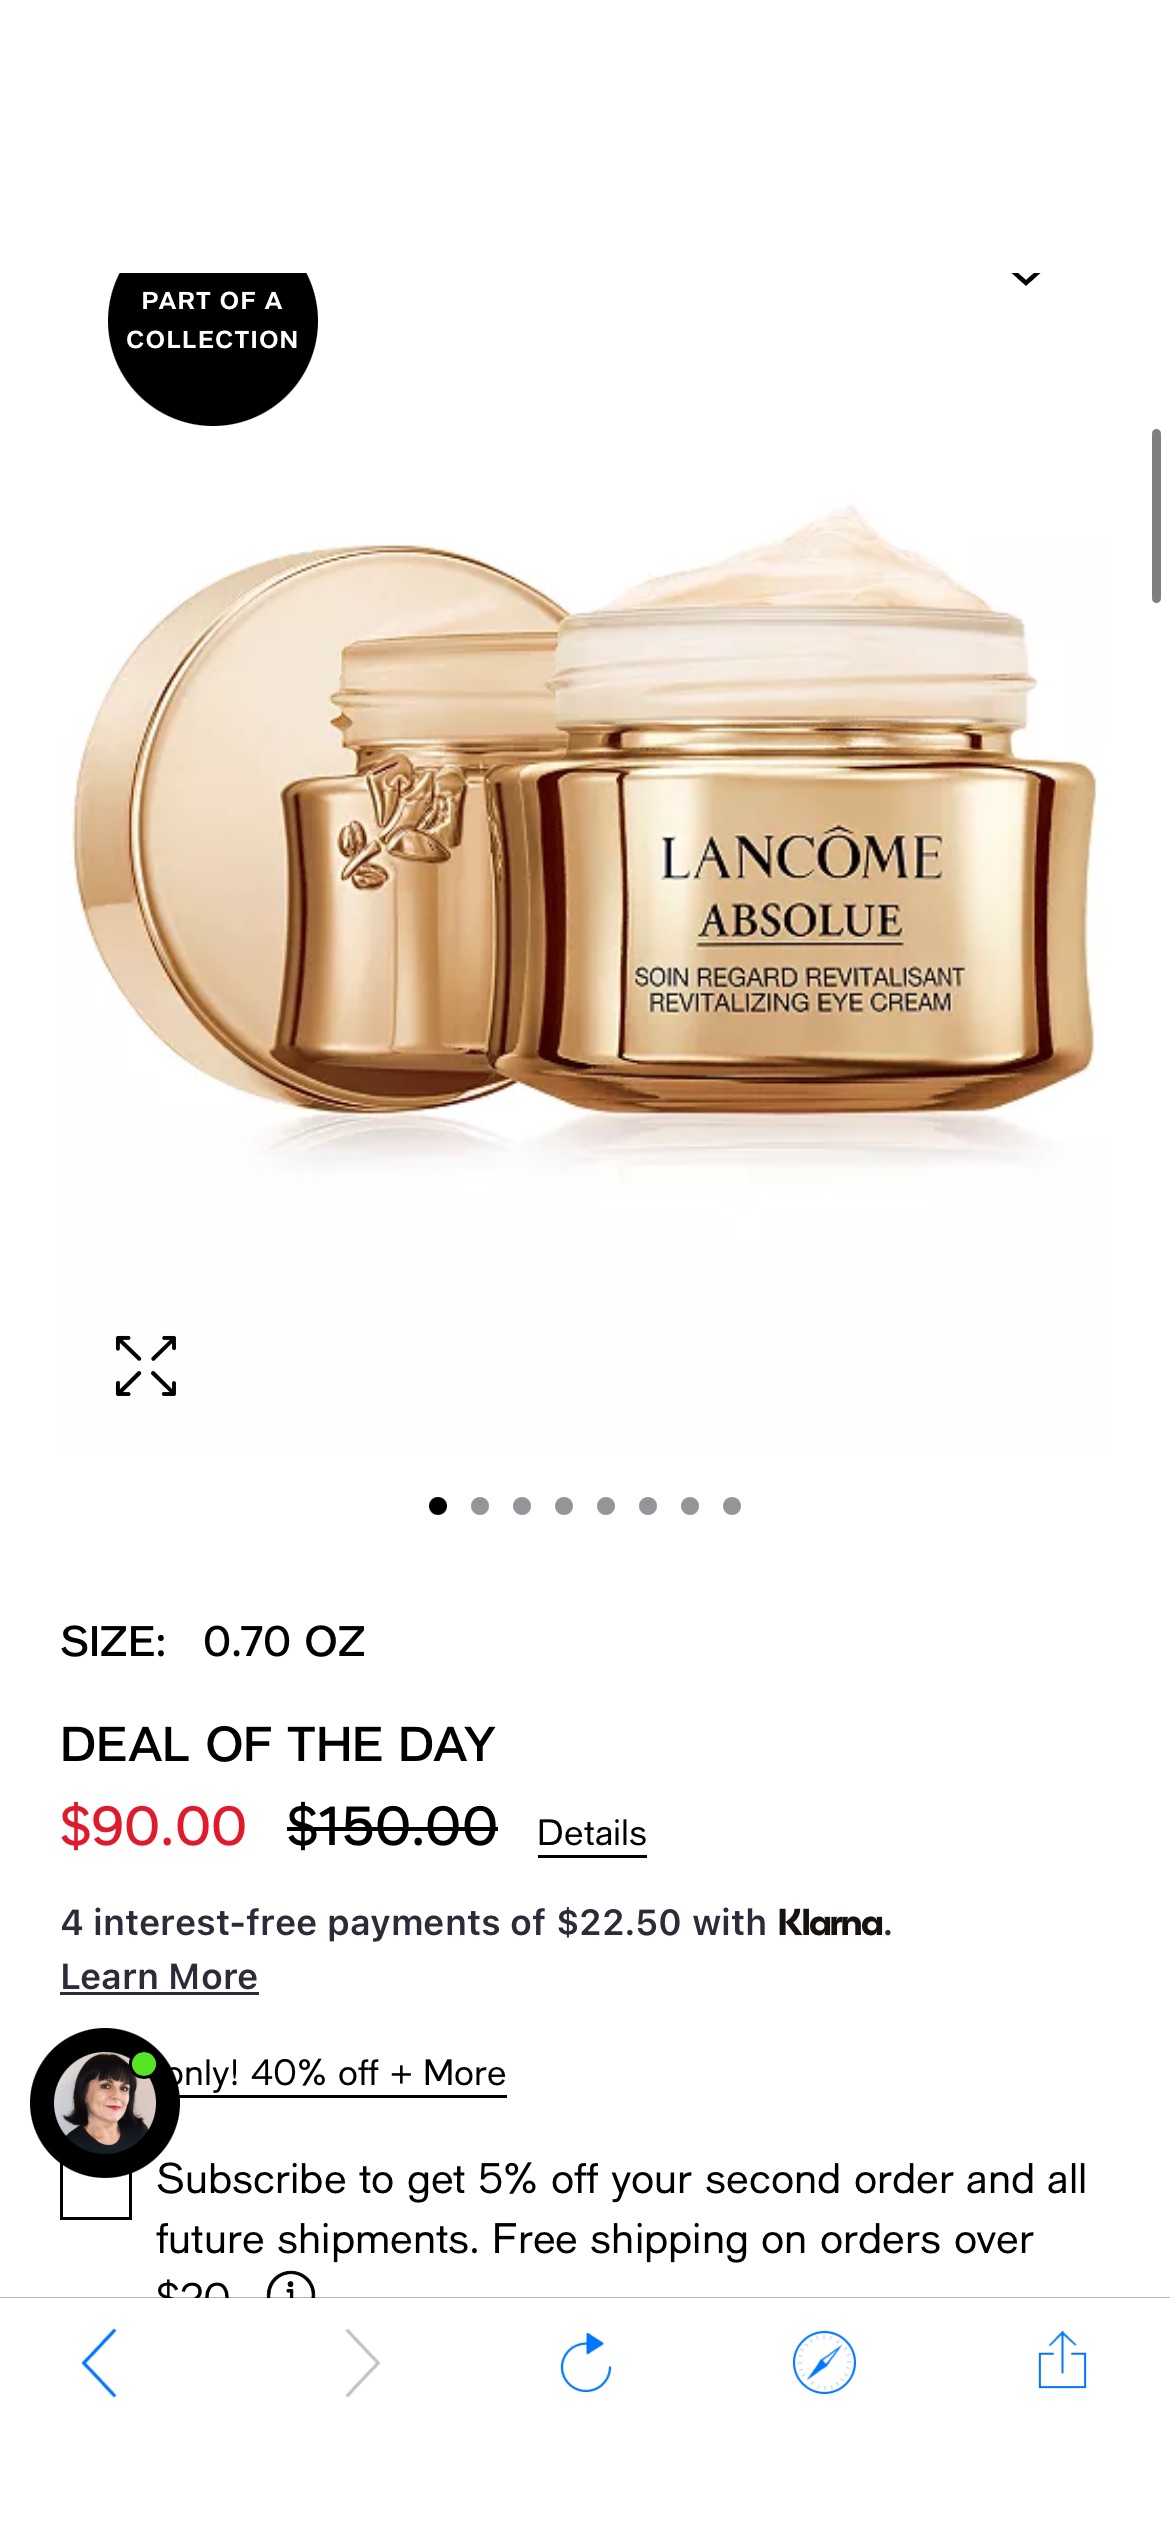 Lancôme Absolue Revitalizing Eye Cream With Grand Rose Extracts, 0.7 oz. - Macy's